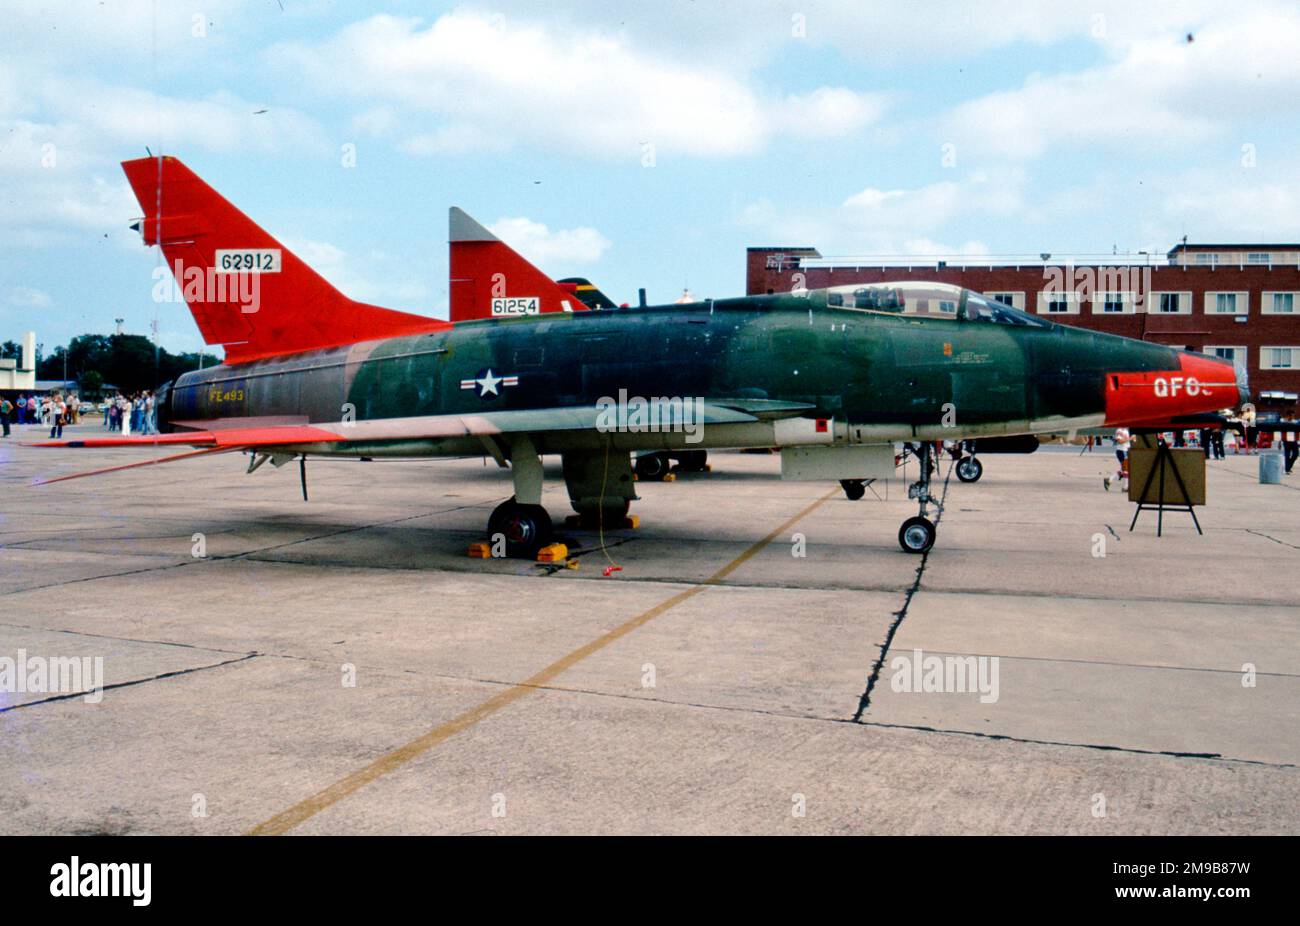 United States Air Force (USAF) - North American QF-100D 56-2912 / QF098 (msn 235-10). Stock Photo